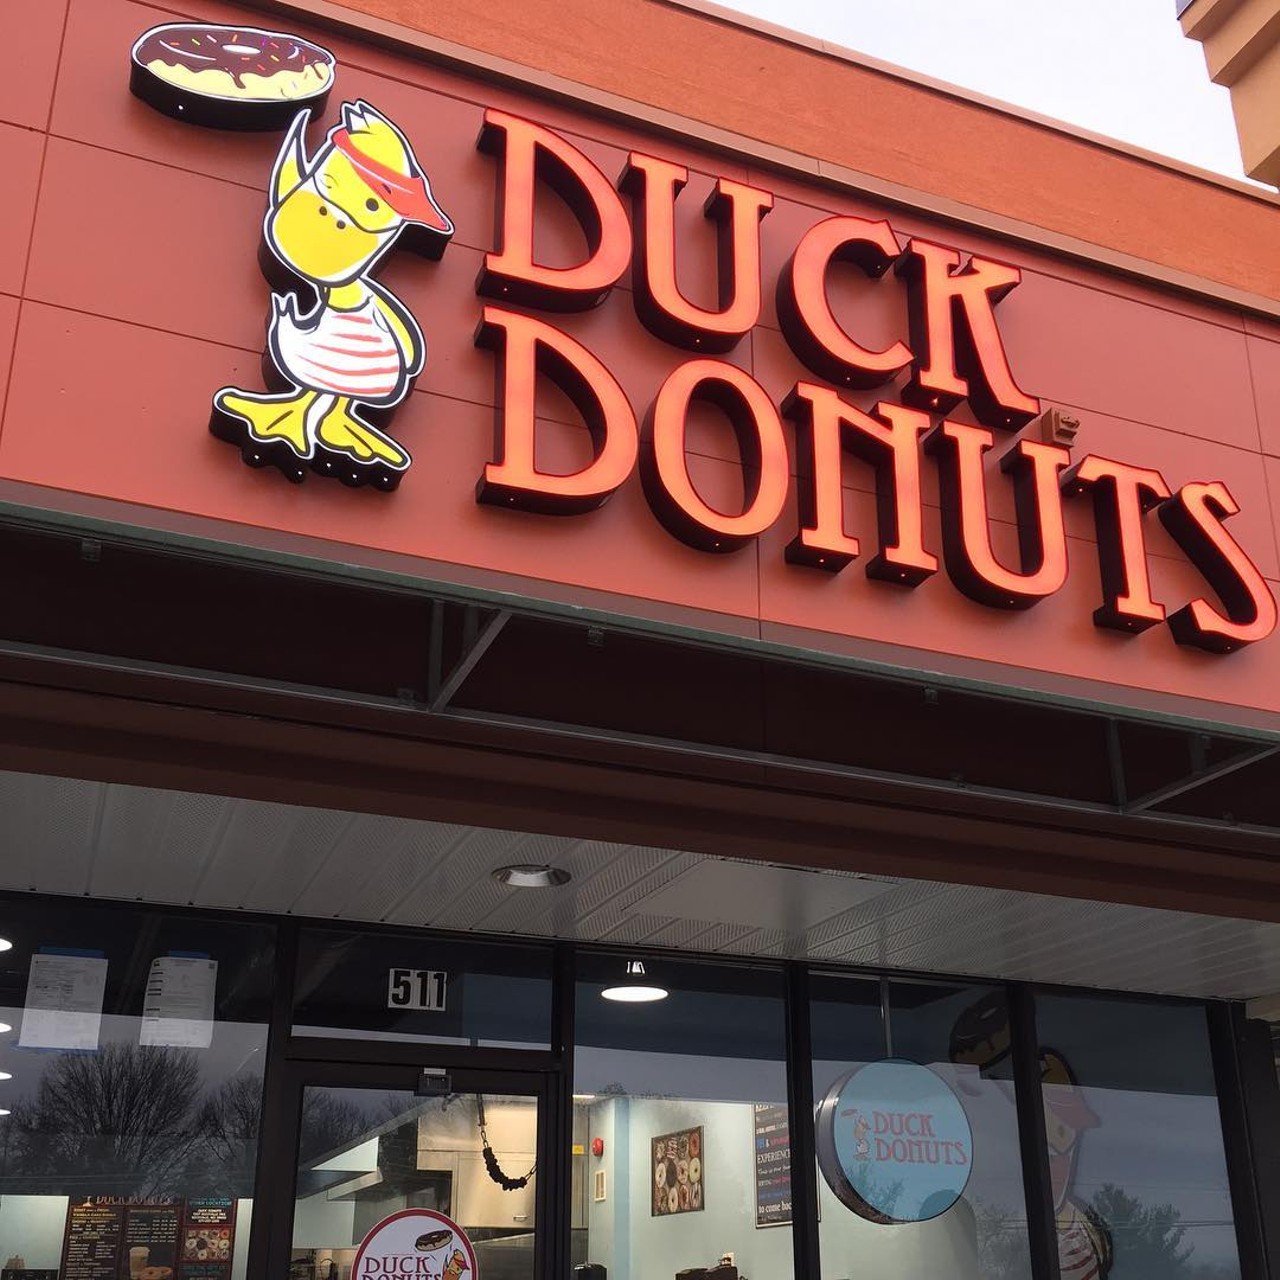 Duck Donuts
710 Centerview Blvd., Kissimmee (407) 350-5832
Duck Donuts were originally only available in North Carolina, but they popped up a spot in Central Florida last year and the rest is history. Your mouth will water just by looking at these doughnuts, and doughnut sundaes are sure to please those with an extra sweet tooth.
Photo via duckdonuts/Instagram